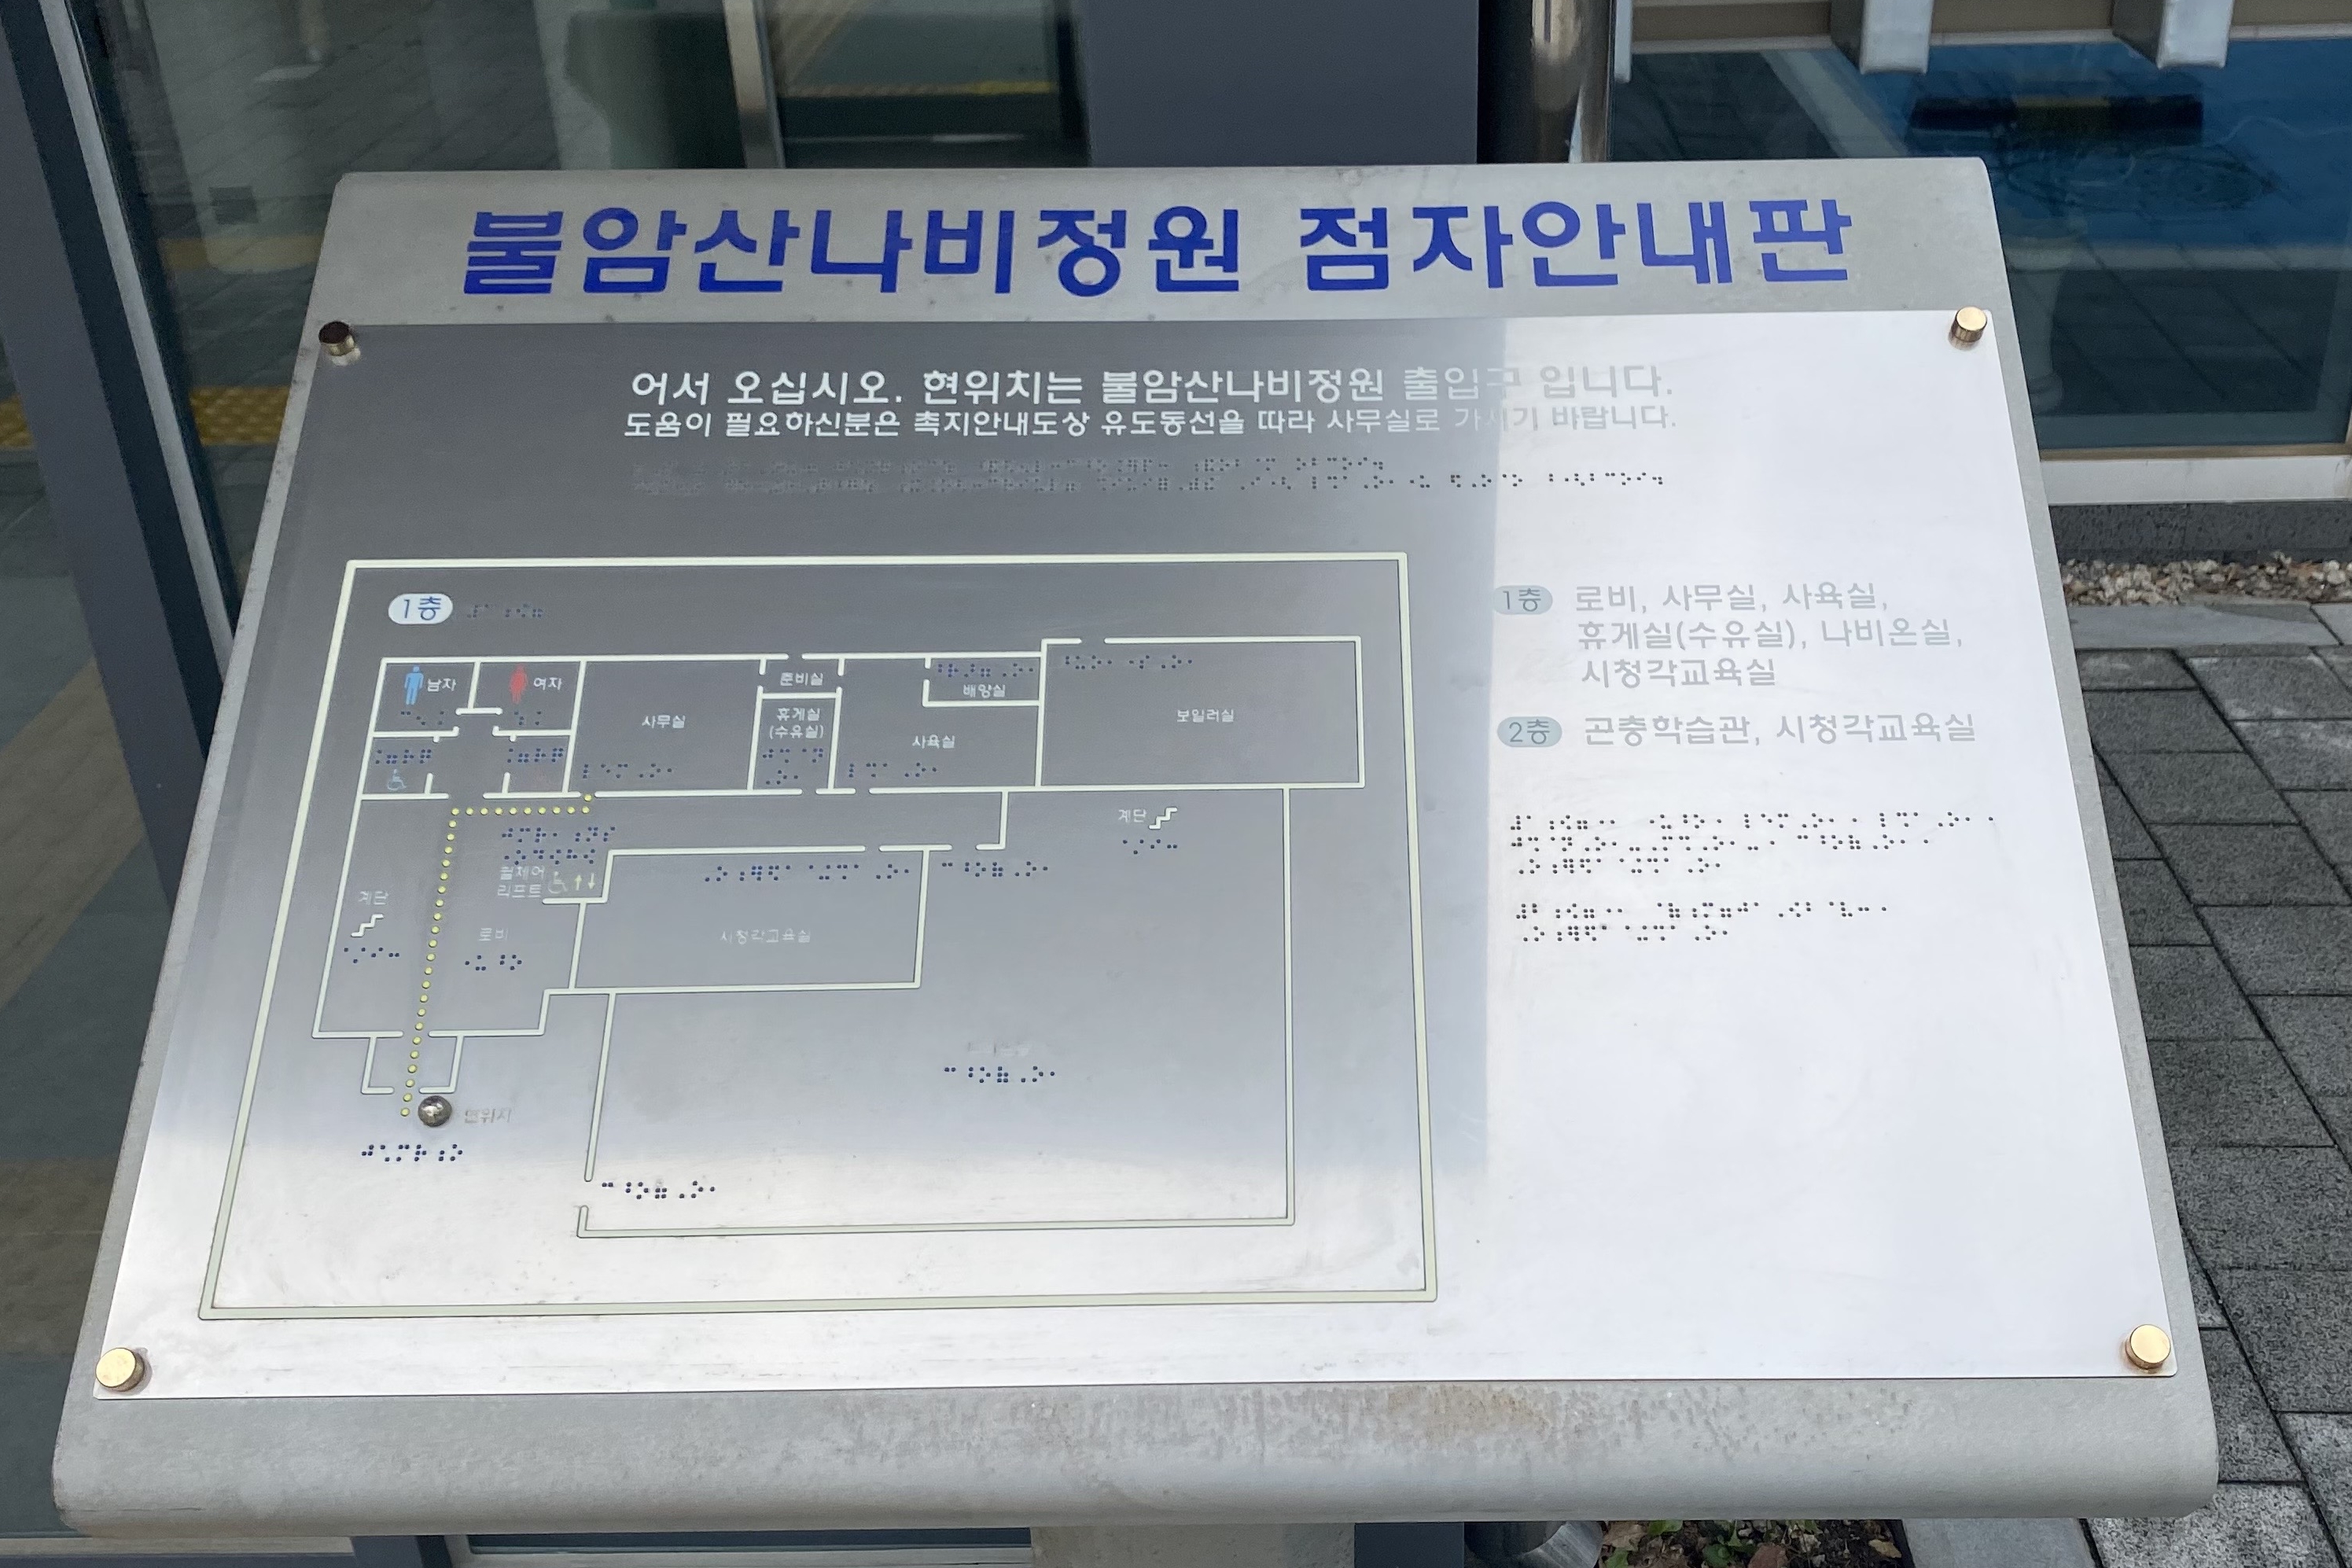 Guide map and information desk0 : Guide map of Buramsan Butterfly Garden with Korean braille description